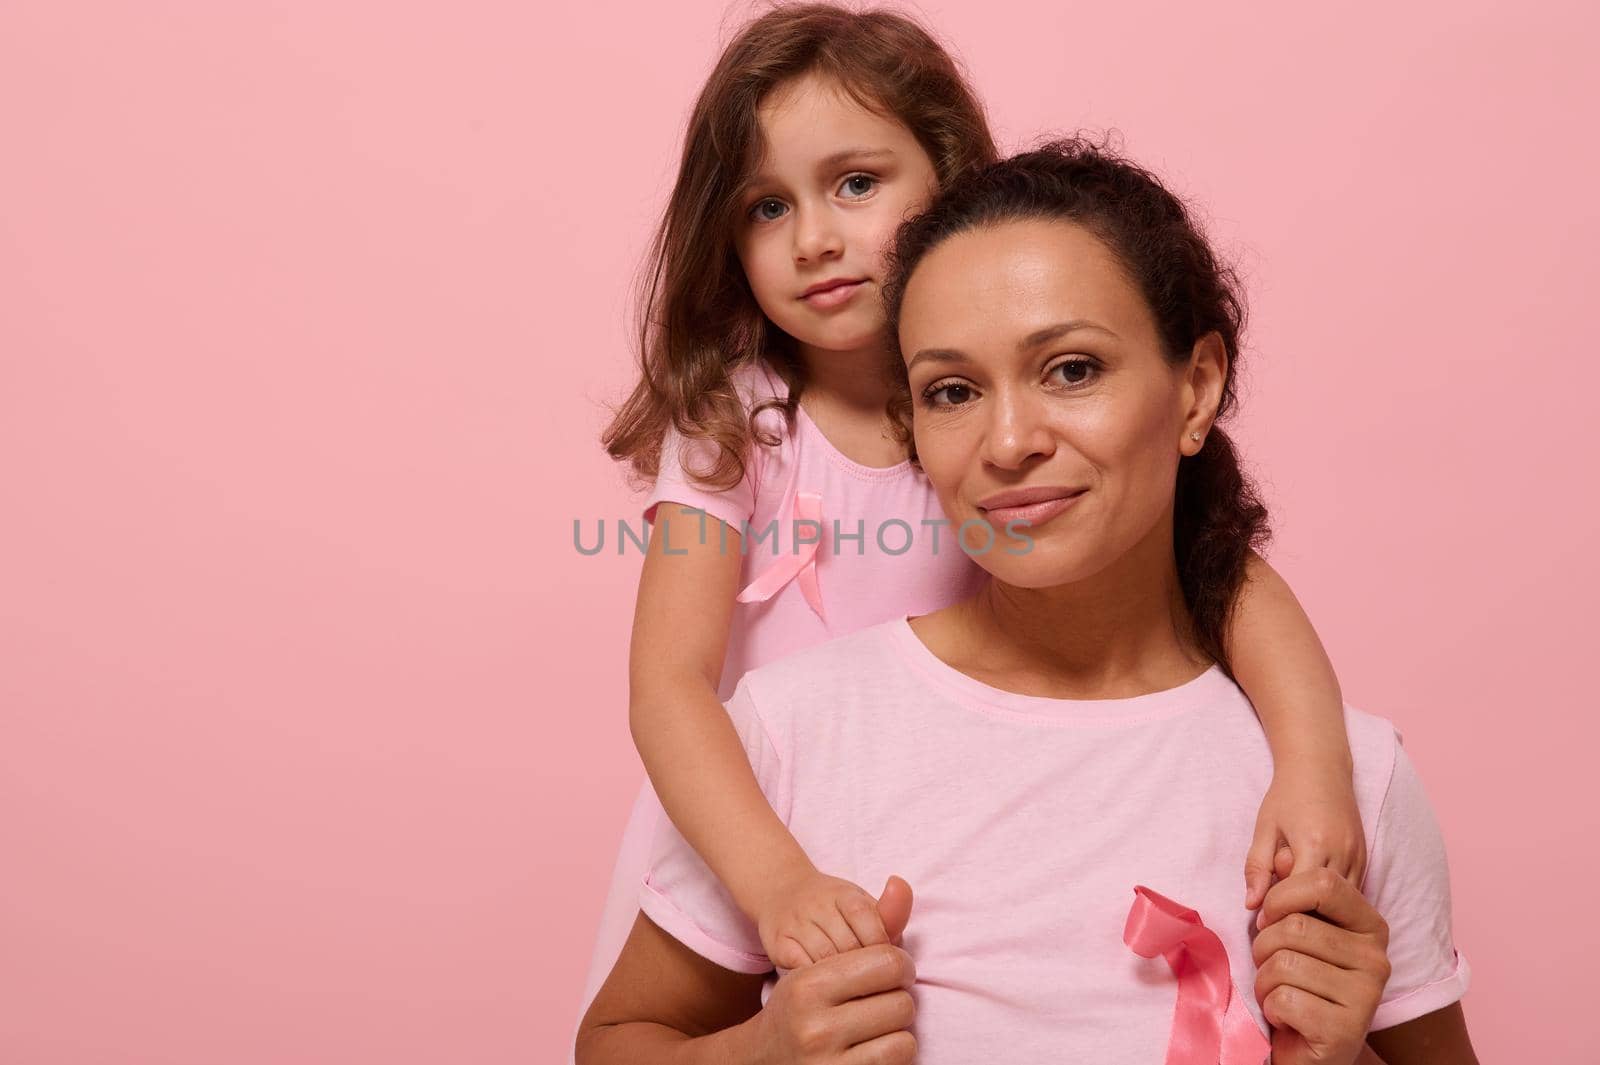 Woman and girl in pink attire with Breast Cancer Awareness ribbon, daughter hugging her mother, holding by hands, looking at camera, supporting cancer patients. Pink background with copy space.